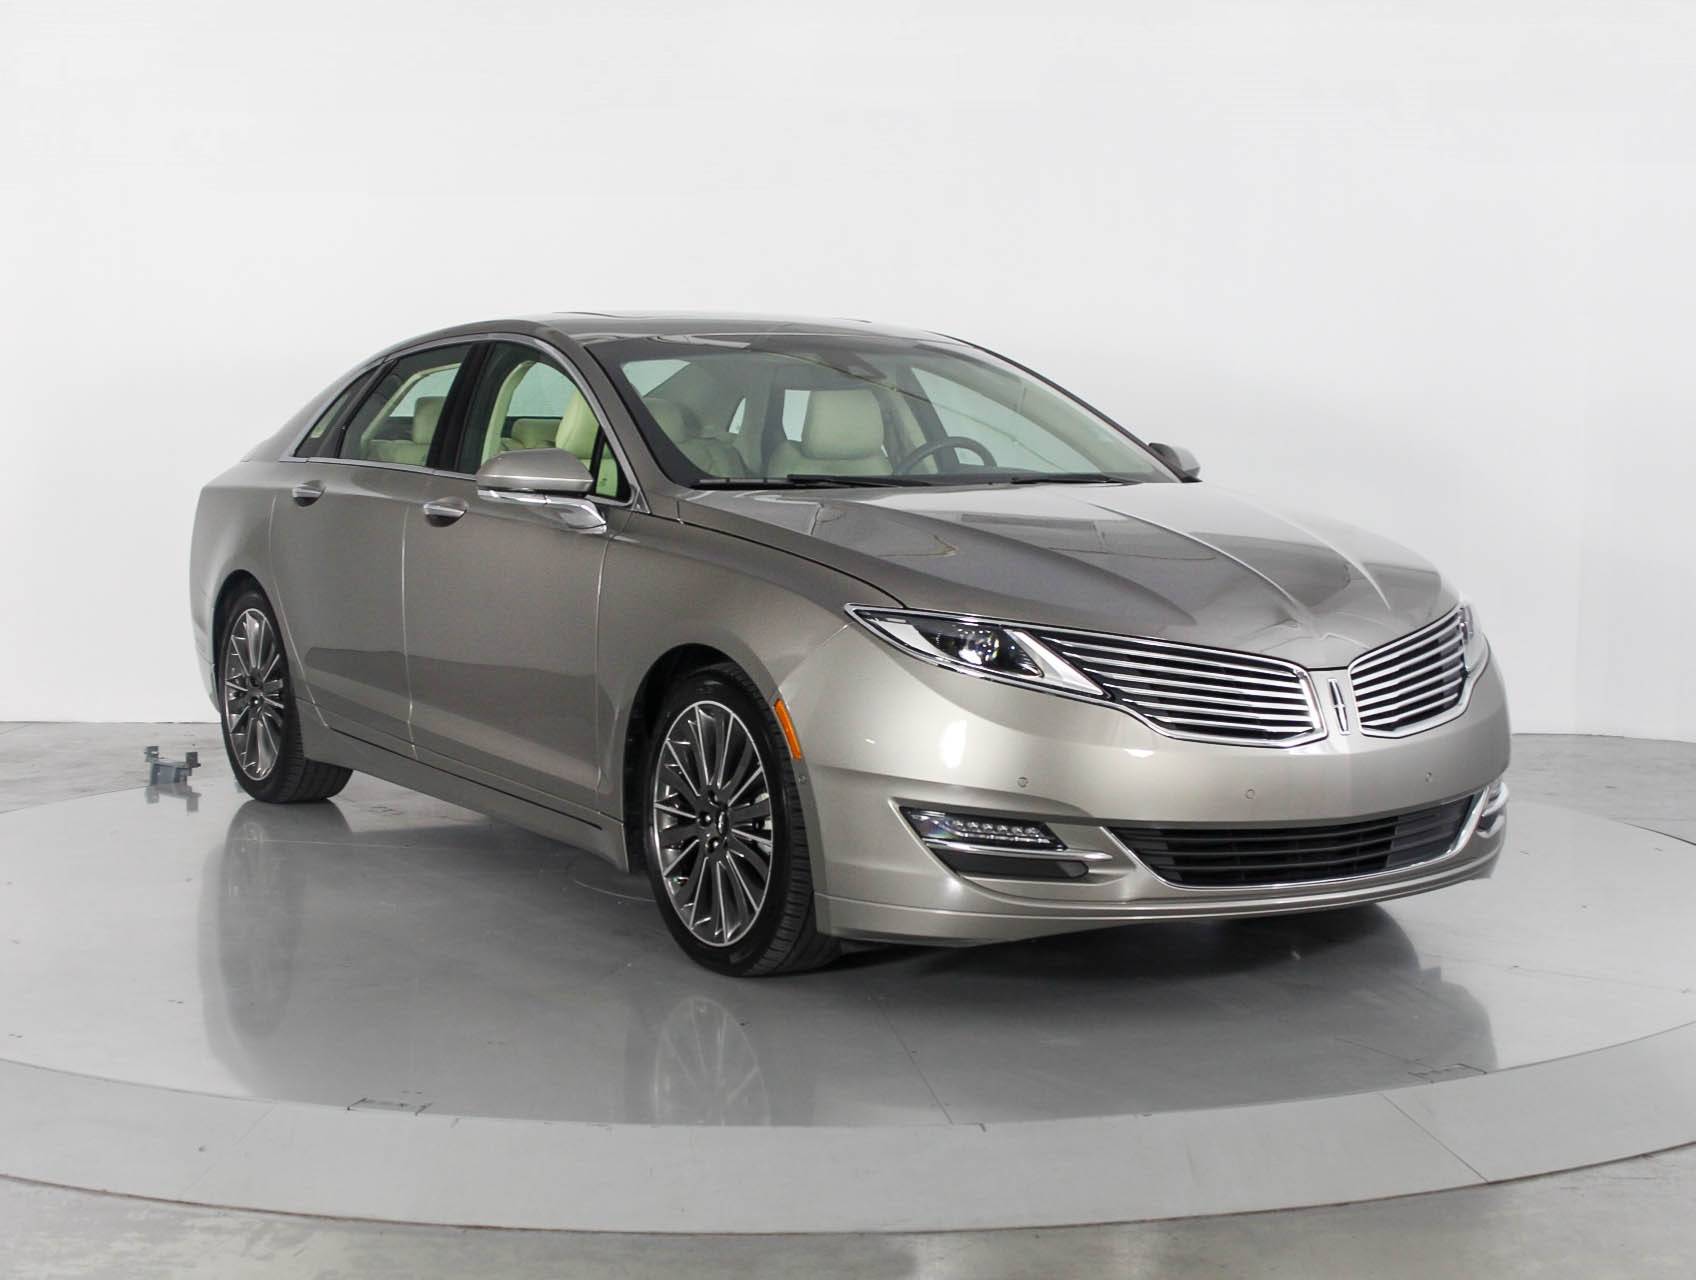 Florida Fine Cars - Used LINCOLN MKZ 2015 WEST PALM HYBRID